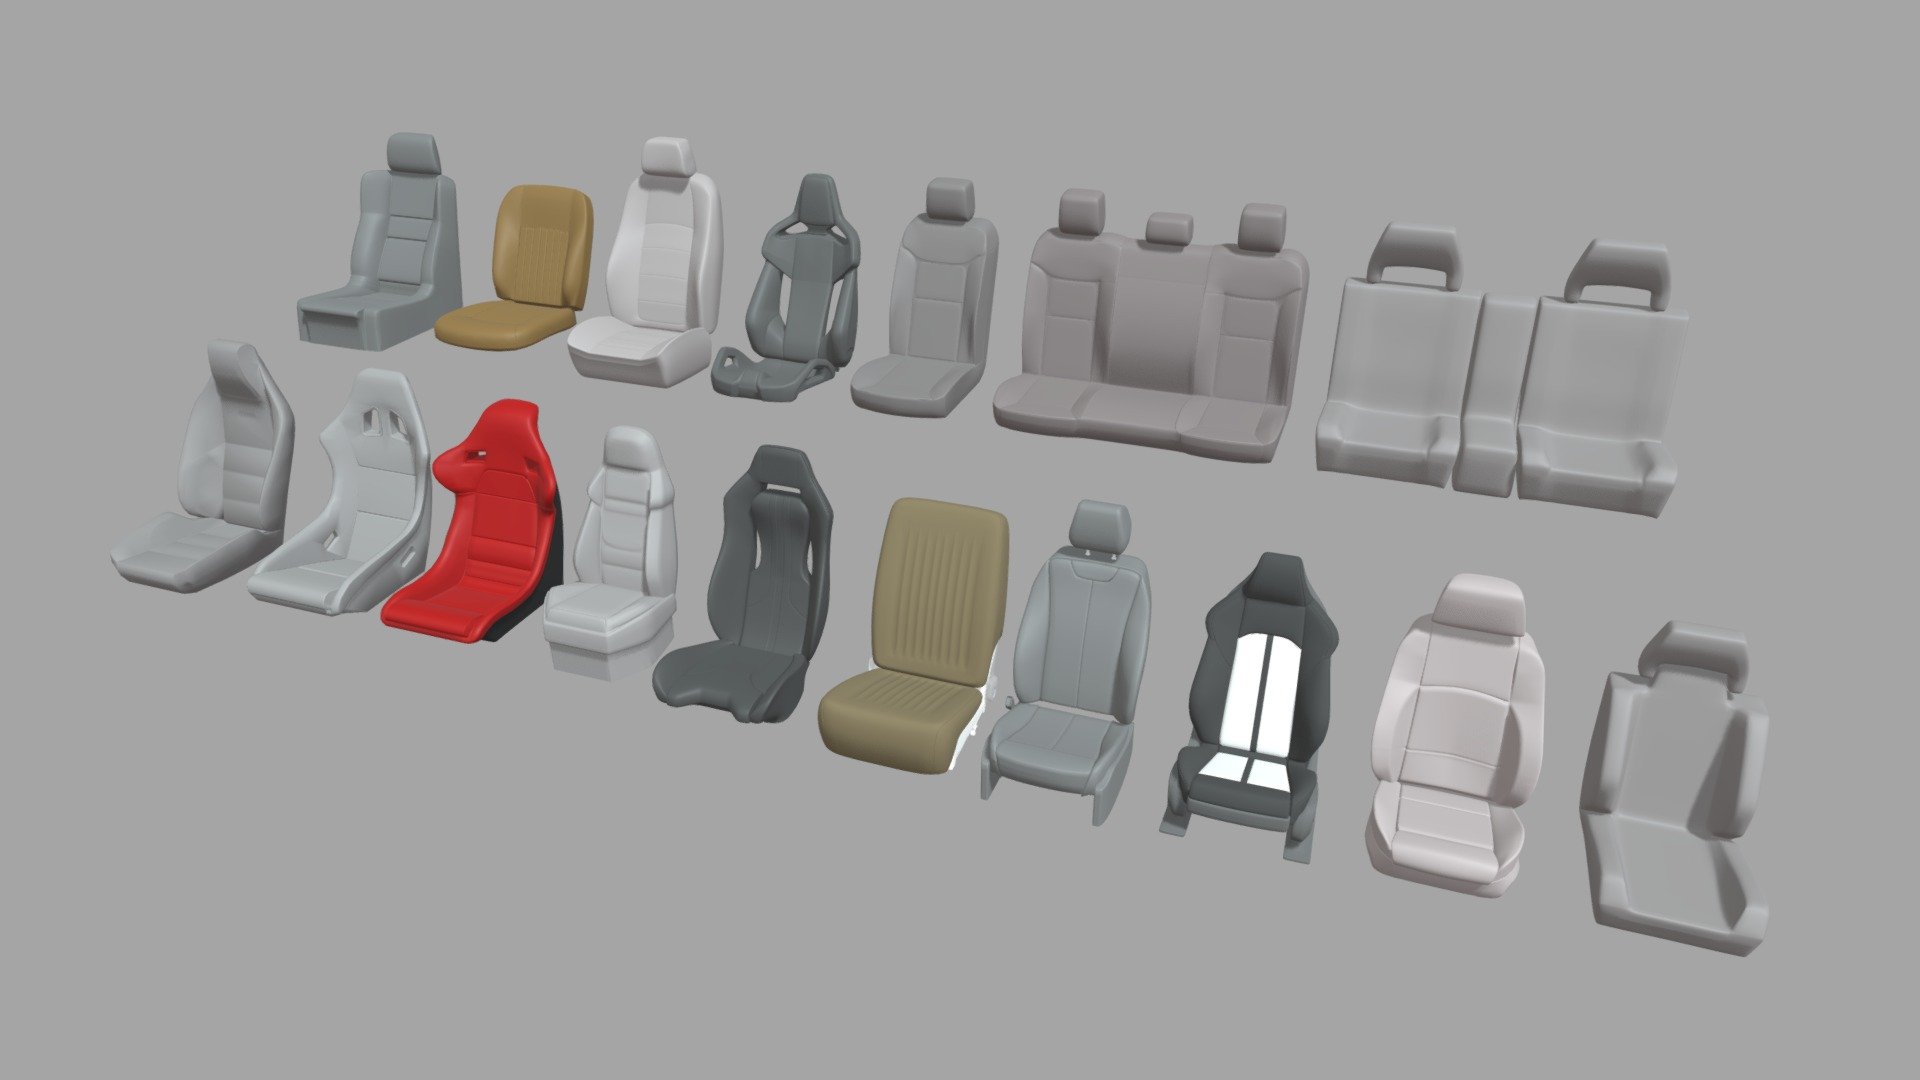 This model contains a Mega Car Seat Pack based on a real stylized car seat from a real italian and german sport car which i modeled in Maya 2018 and is available for selling as a full car containing interior and just exterior. This model is perfect to create a new great scene with different car pieces or part of a car model.

This model is one of a great collection of car parts and car seats that are modeled and separated in 3 different packs and every different car seat ready on my profile. Some of this seats are ready for printing and others not. Any doubt you have contact me. You will find each car seat available on my profile.

If you need any kind of help contact me, i will help you with everything i can. If you like the model please give me some feedback, I would appreciate it.

Don’t doubt on contacting me, i would be very happy to help. If you experience any kind of difficulties, be sure to contact me and i will help you. Sincerely Yours, ViperJr3D - Mega Car Seat Pack - Buy Royalty Free 3D model by ViperJr3D 3d model